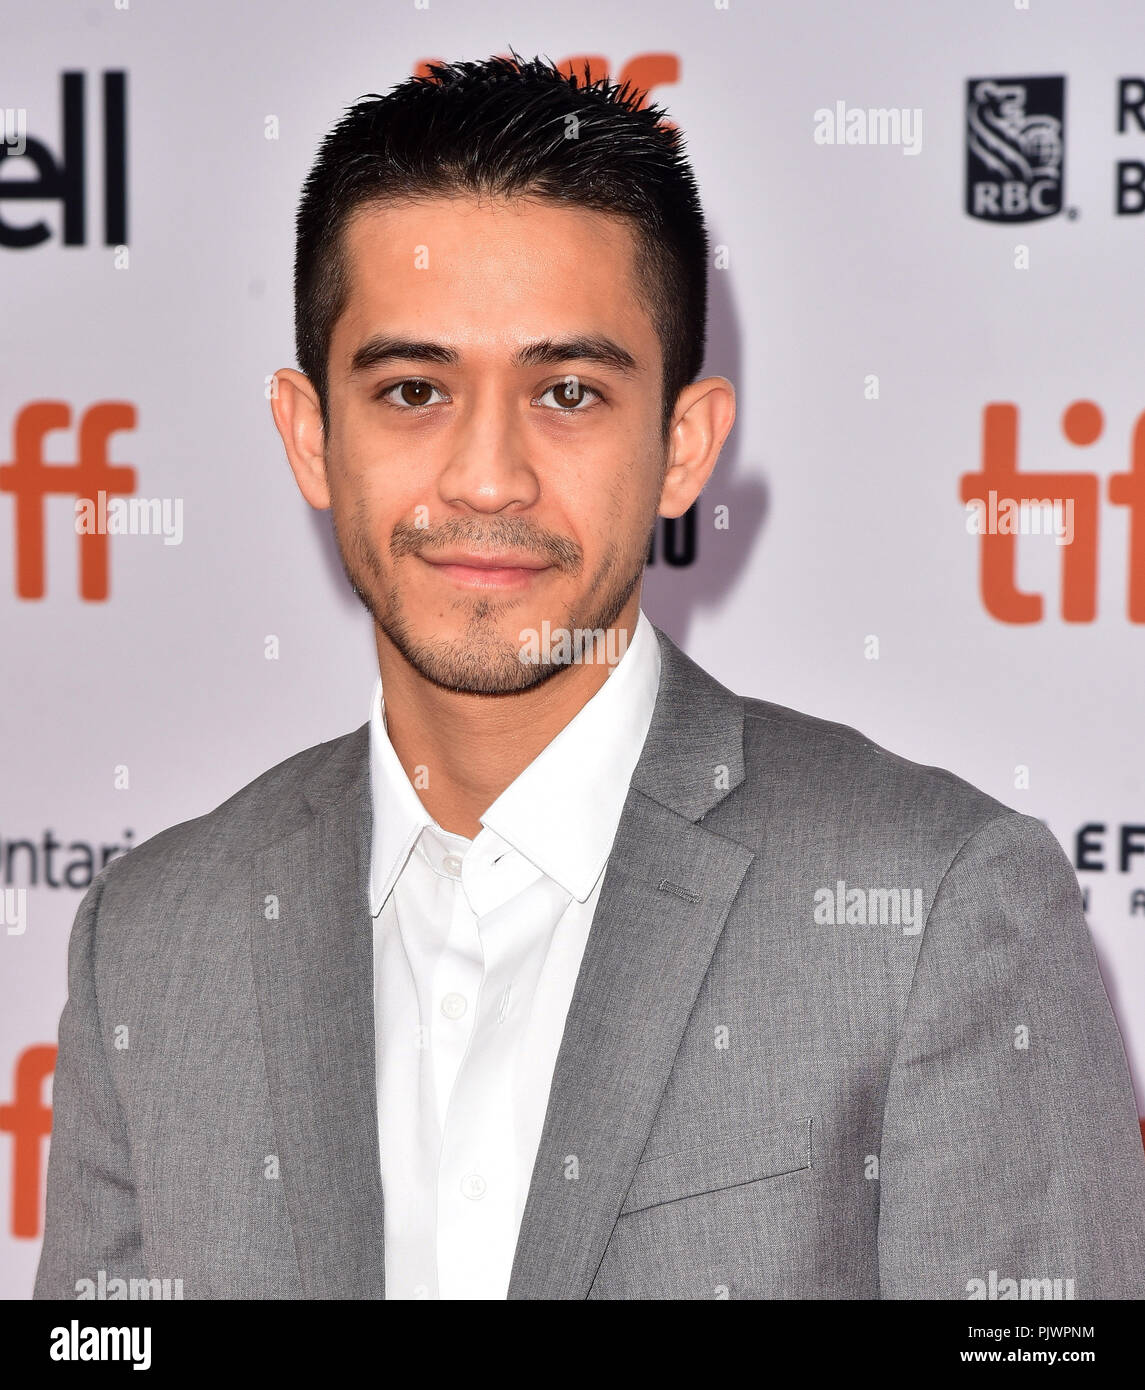 Toronto, Canada. 8th September 2018.  David Zaldivar attends the 'Ben Is Back' premiere during 2018 Toronto International Film Festival at Princess of Wales Theatre on September 8, 2018 in Toronto, Canada. Credit: Is/Media Punch/Alamy Live News Stock Photo